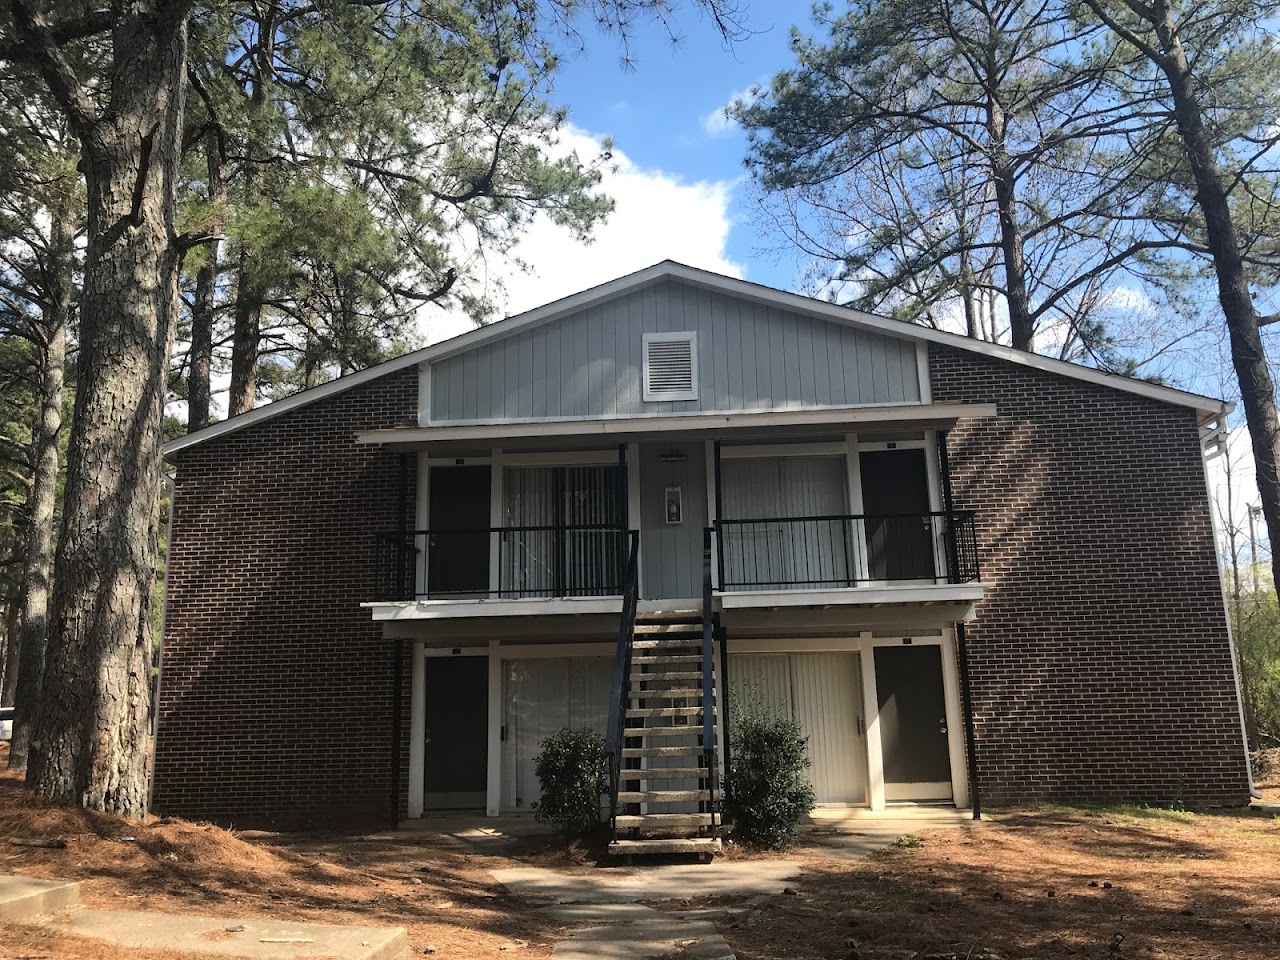 Photo of FOREST RIVER APTS. Affordable housing located at 515 GEORGE WALLACE DR GADSDEN, AL 35903